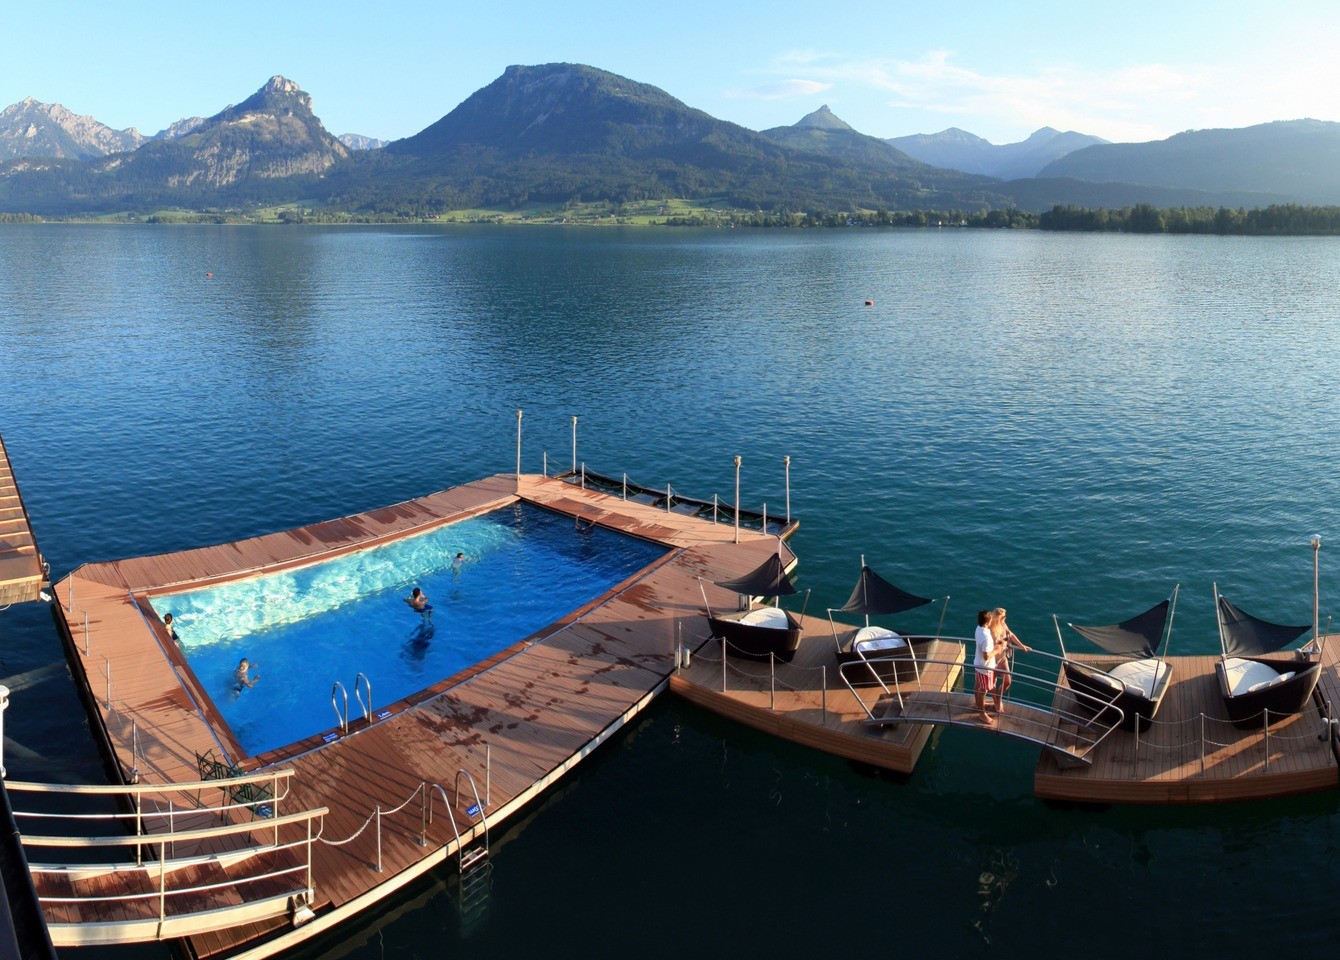 Nestled amidst the majestic Salzkammergut region, Lake Wolfgang, or Wolfgangsee, is a stunning alpine lake surrounded by picturesque mountains and charming lakeside villages.